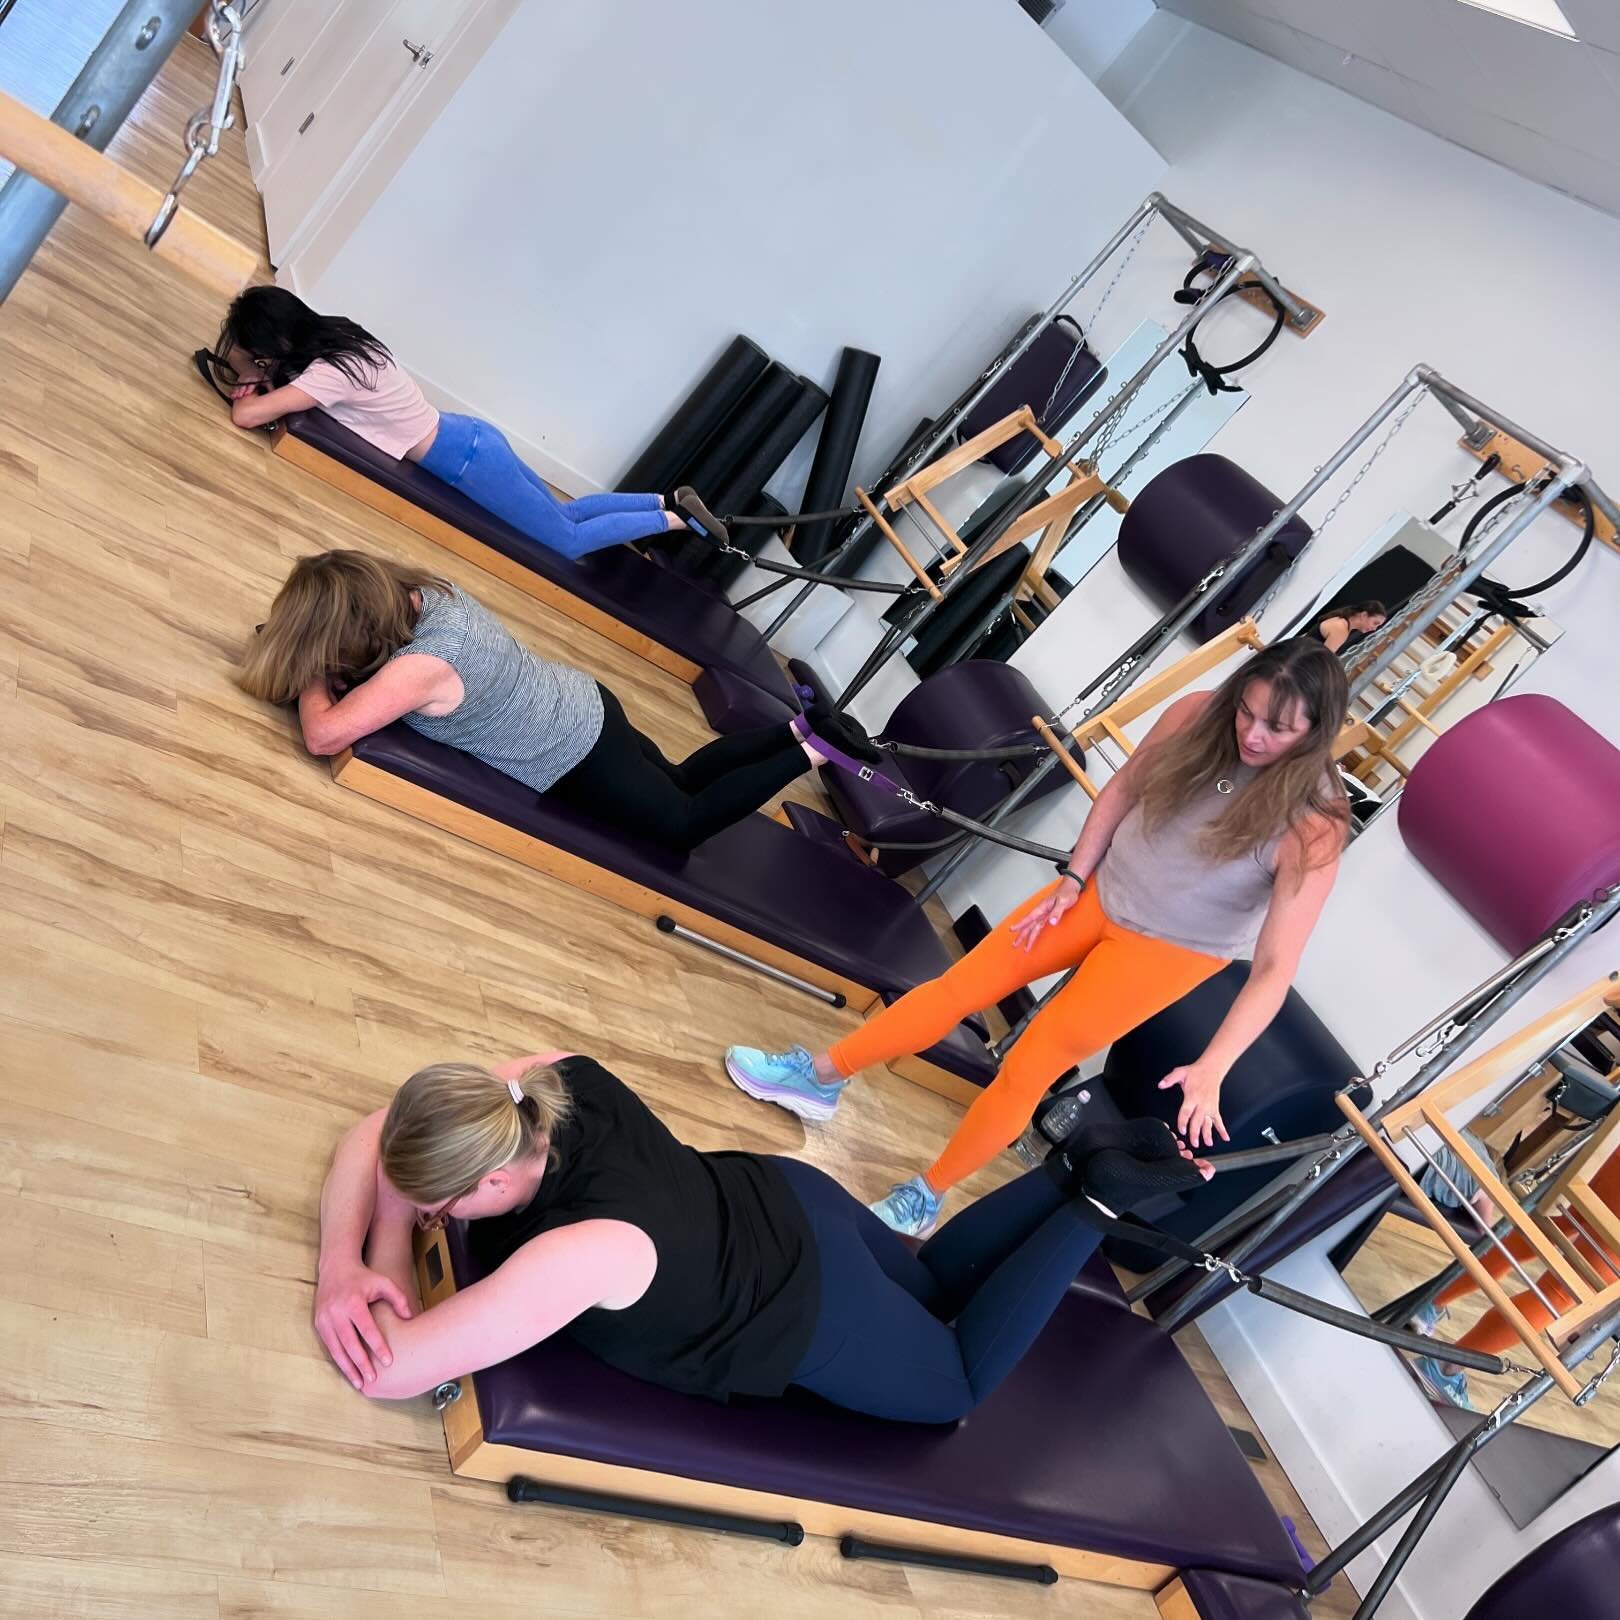 Want to share your Pilates experience with the people you love? Book a duo, trio, or quartet! 

These sessions are not only fun and challenging but also provide a supportive environment with the accountability of your faves. With our instructor&rsquo